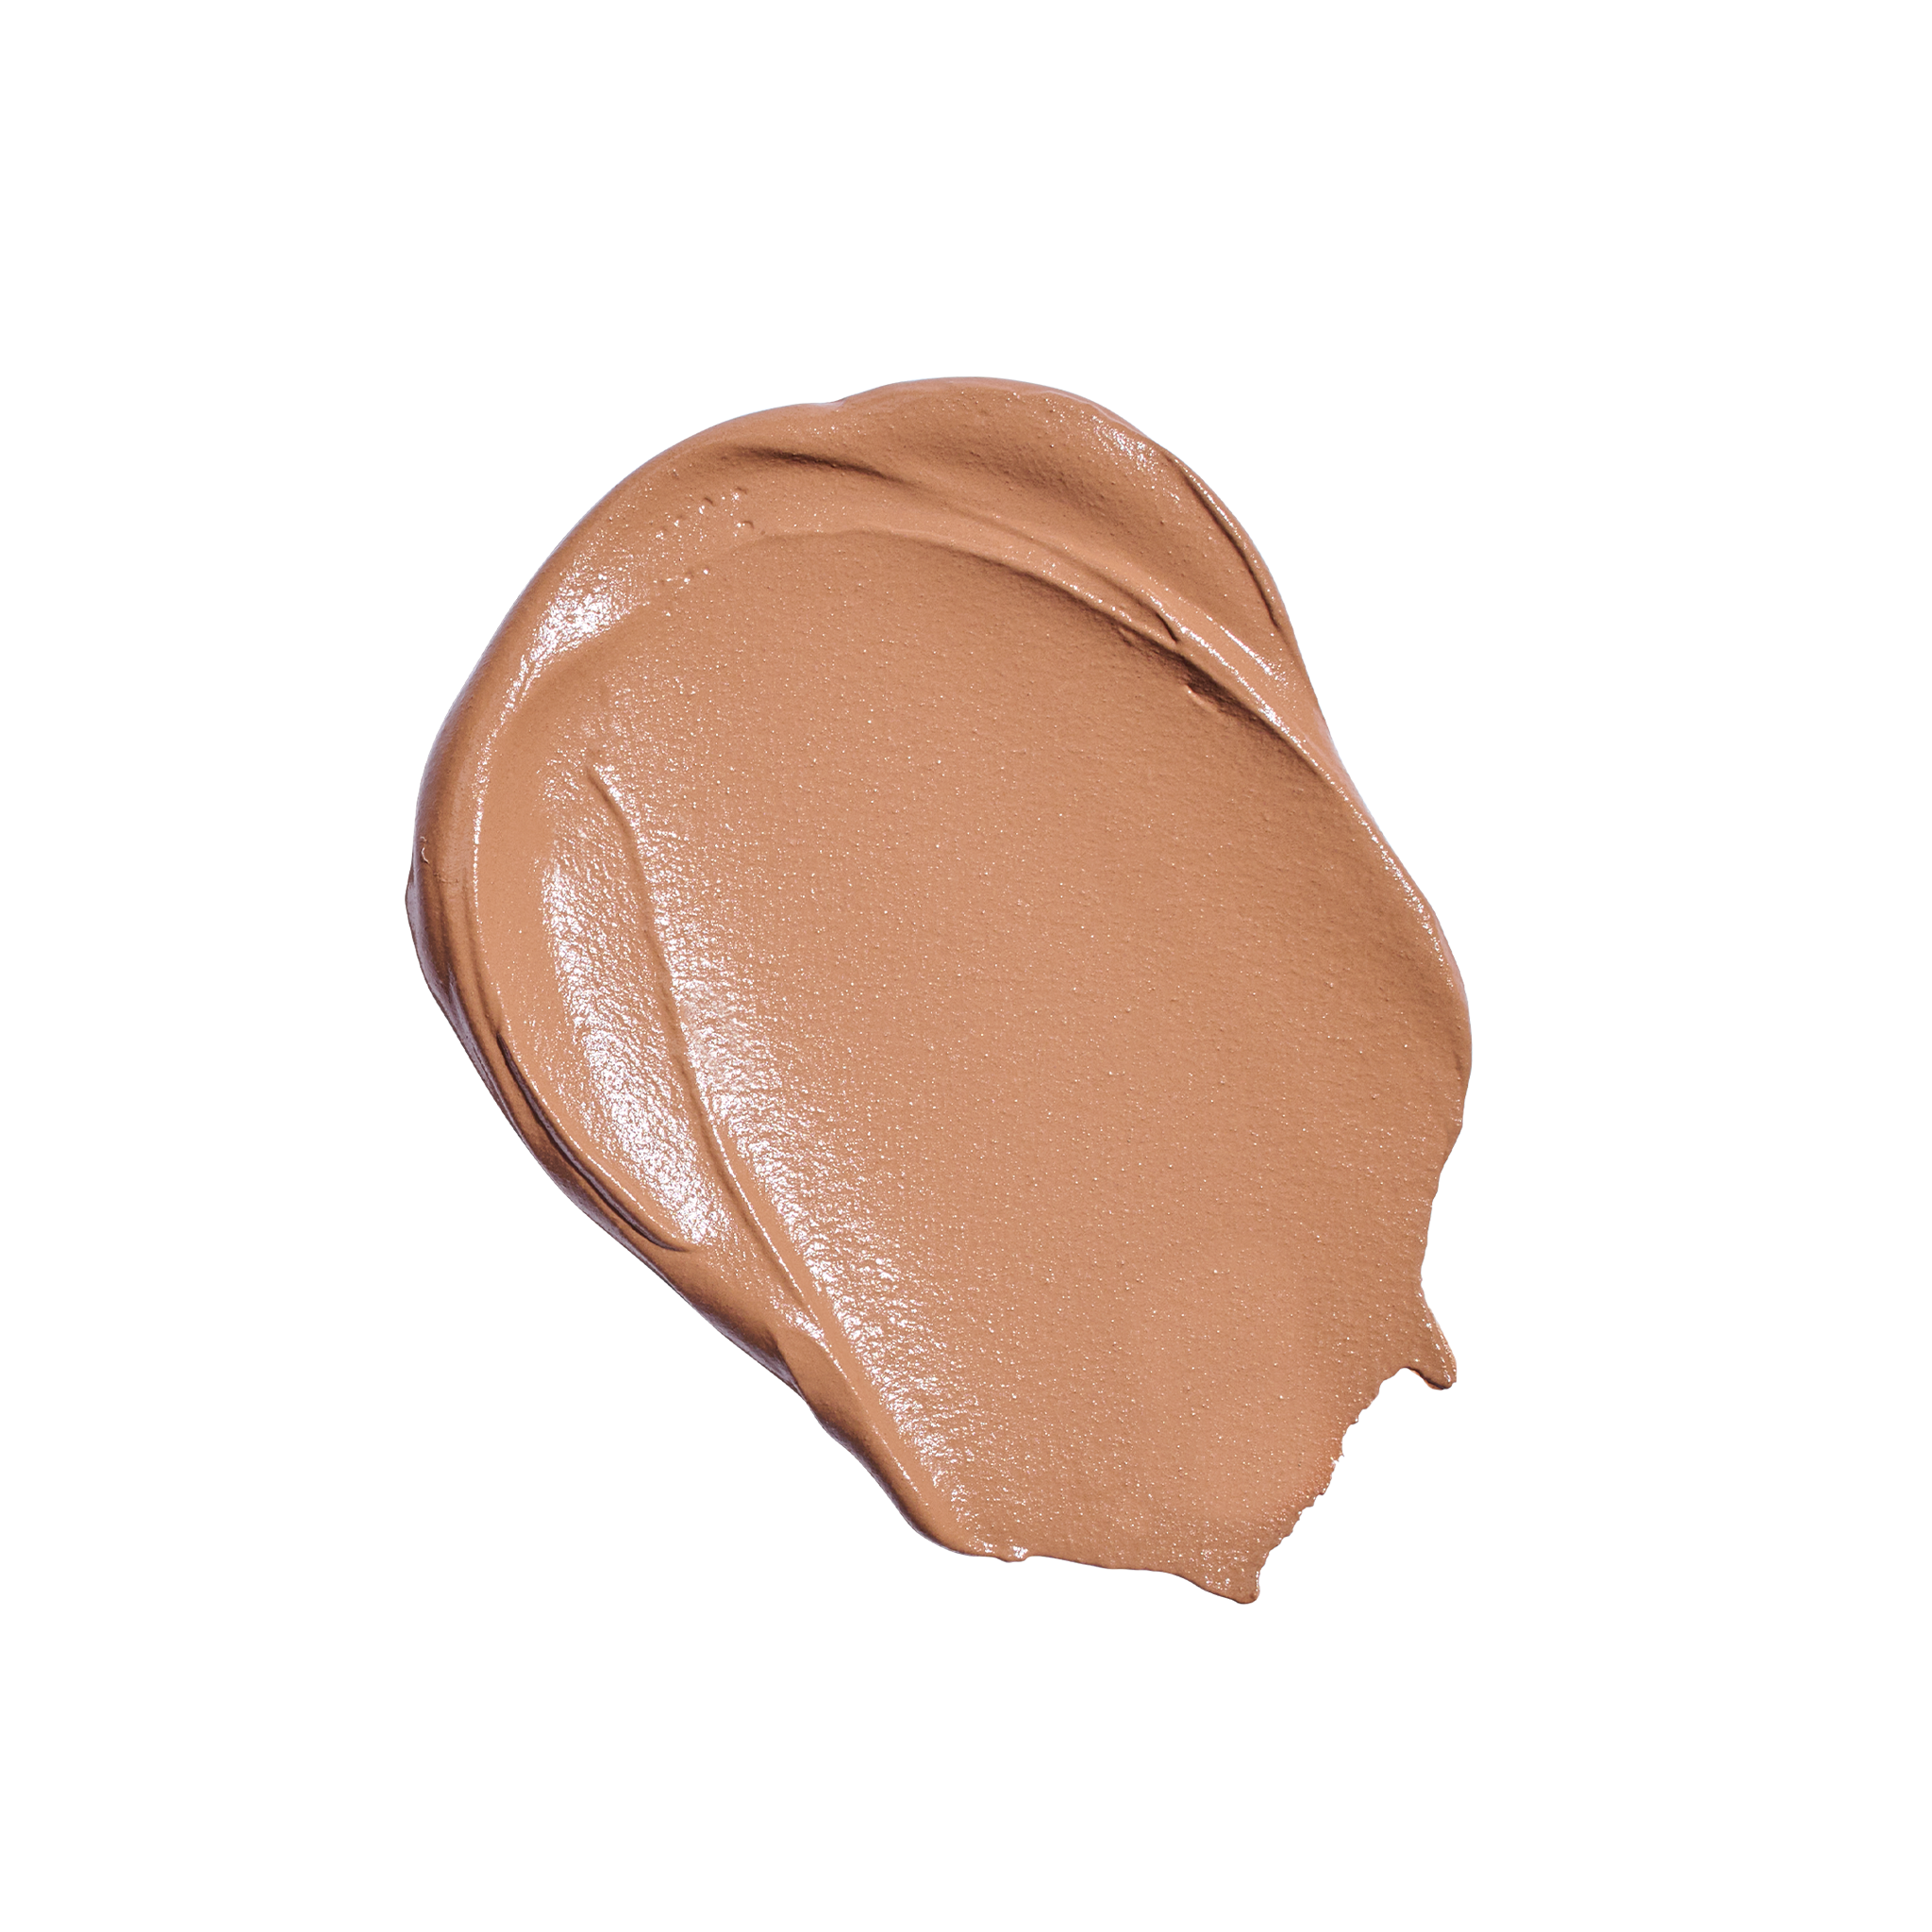 Tint du Soleil™ Whipped Mineral Foundation SPF 30 swatch || Deep